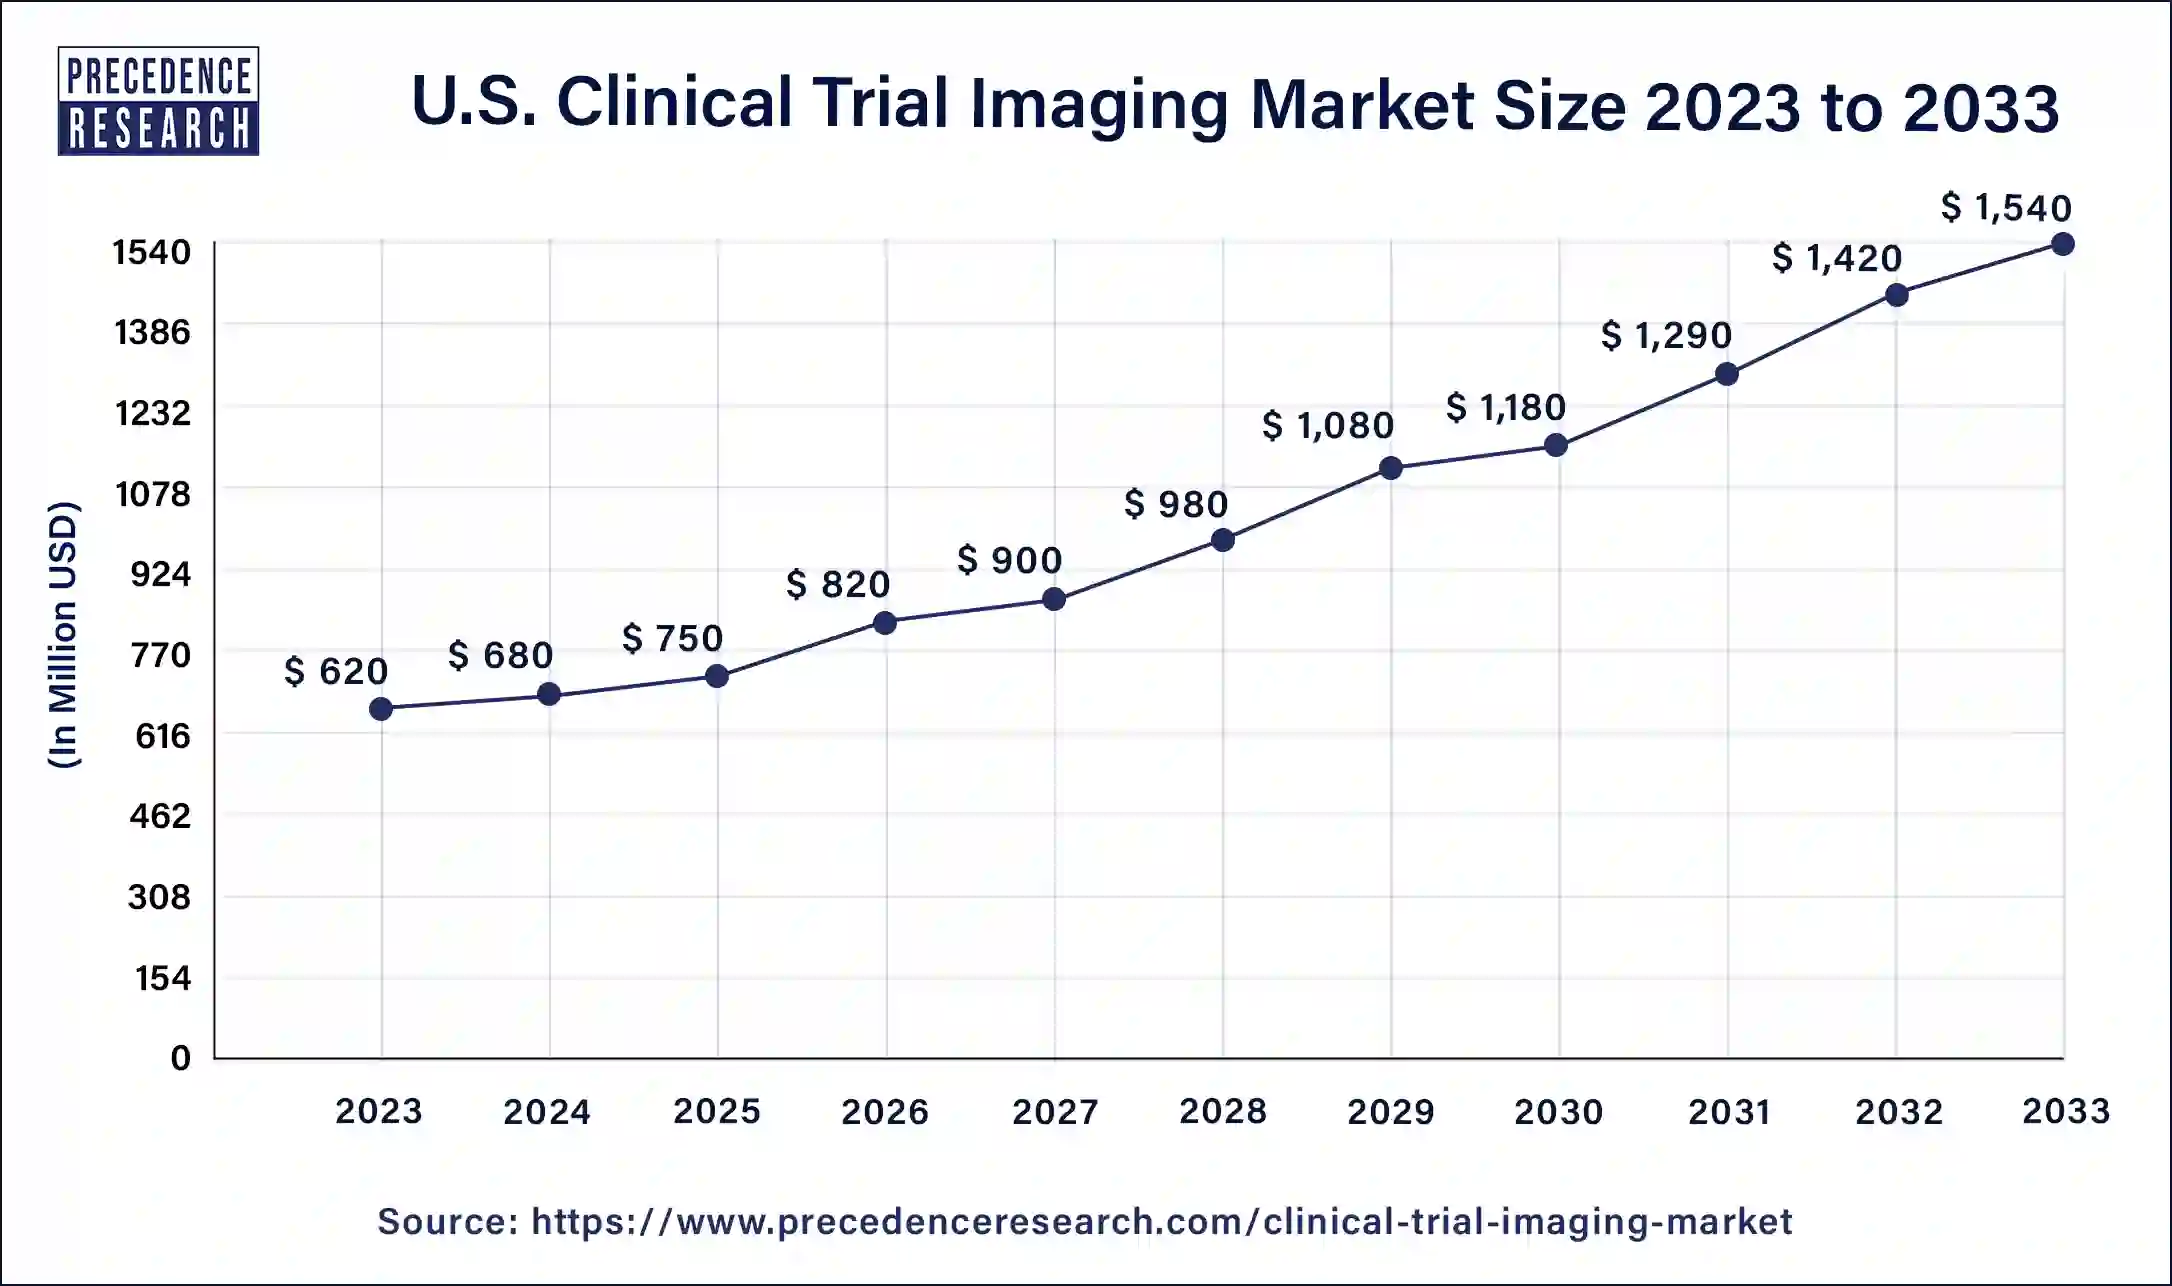 U.S. Clinical Trial Imaging Market Size 2024 to 2033